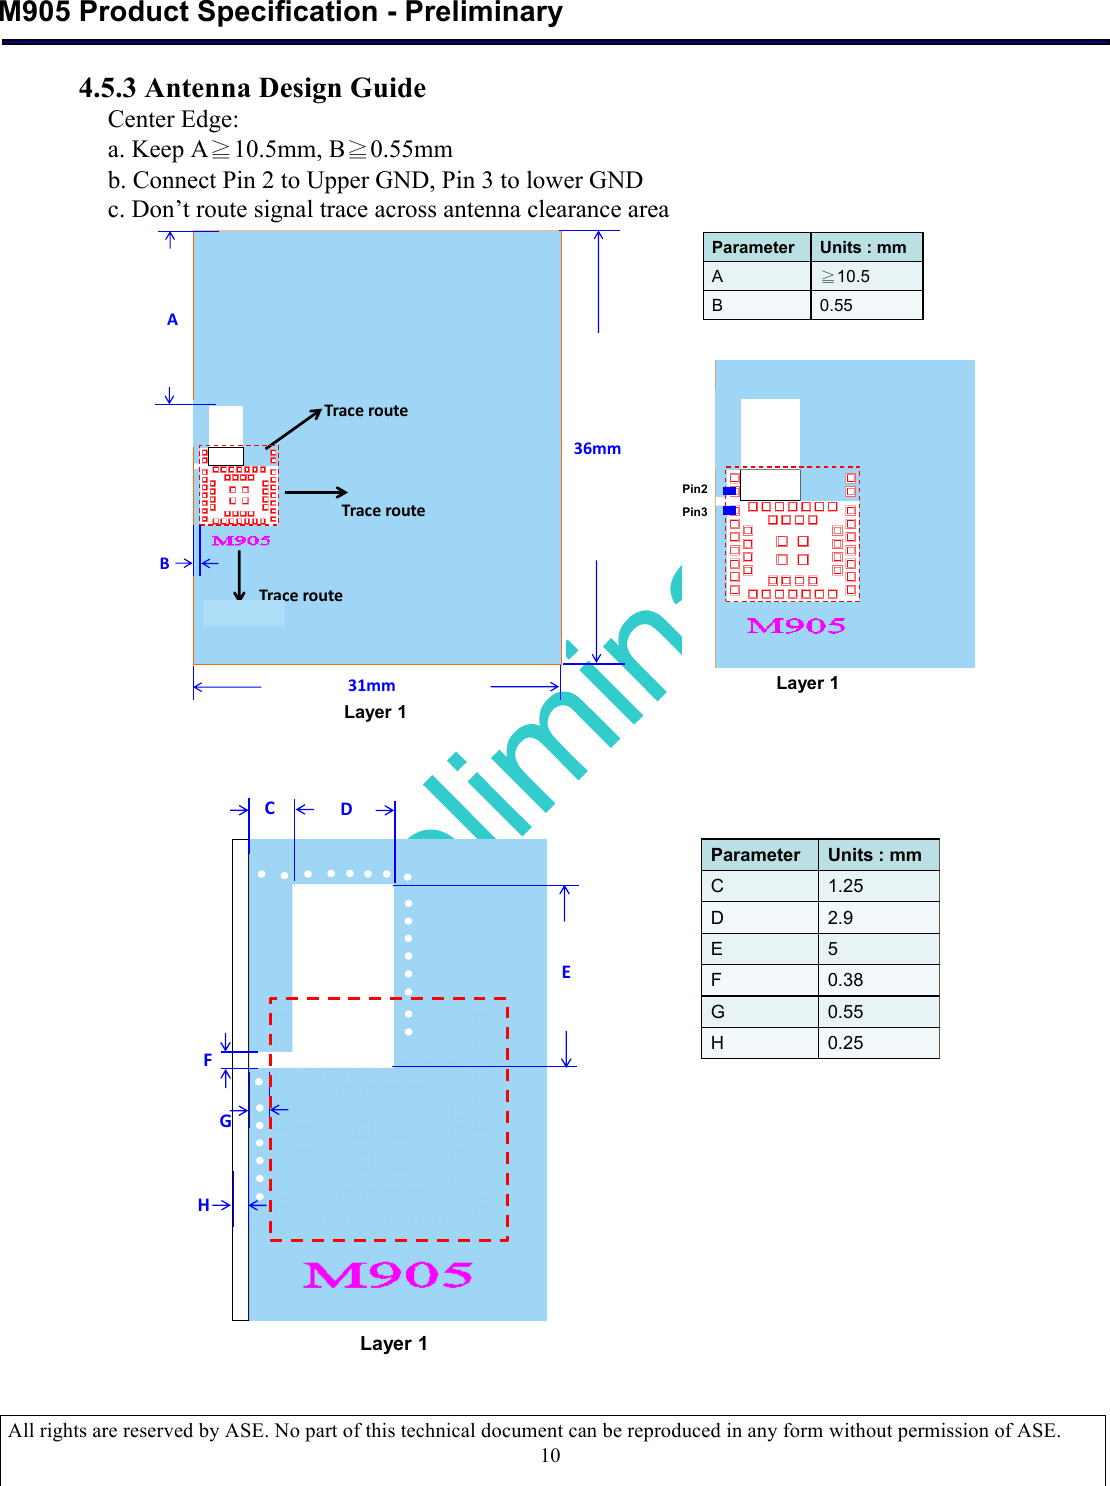  M905 Product Specification - Preliminary  All rights are reserved by ASE. No part of this technical document can be reproduced in any form without permission of ASE.  10 4.5.3 Antenna Design Guide Center Edge: a. Keep A≧10.5mm, B≧0.55mm b. Connect Pin 2 to Upper GND, Pin 3 to lower GND c. Don’t route signal trace across antenna clearance area ParameterUnits : mmA≧10.5B0.55ATrace&apos;routeTrace&apos;routeTrace&apos;route36mm31mmBPin2Pin3Layer 1Layer 1   CDEParameterUnits : mmC1.25D2.9E5F0.38G0.55H0.25Layer 1FHG         